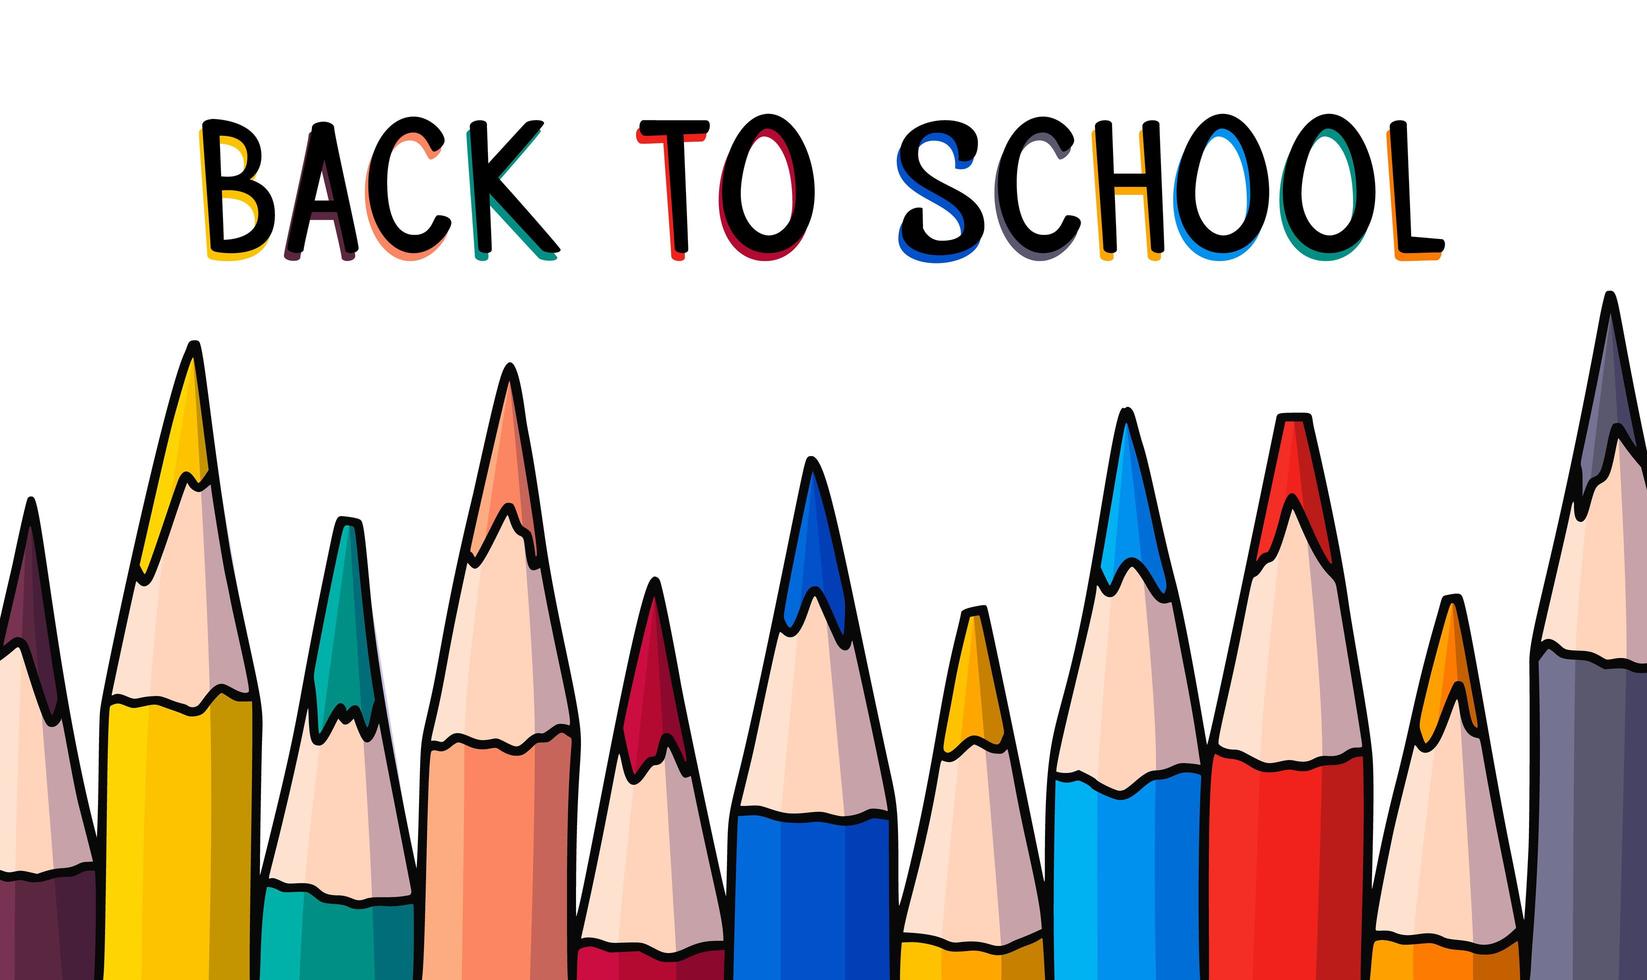 Doodle pencil banner. Back to school hand drawn vector illustration with colored pencils.